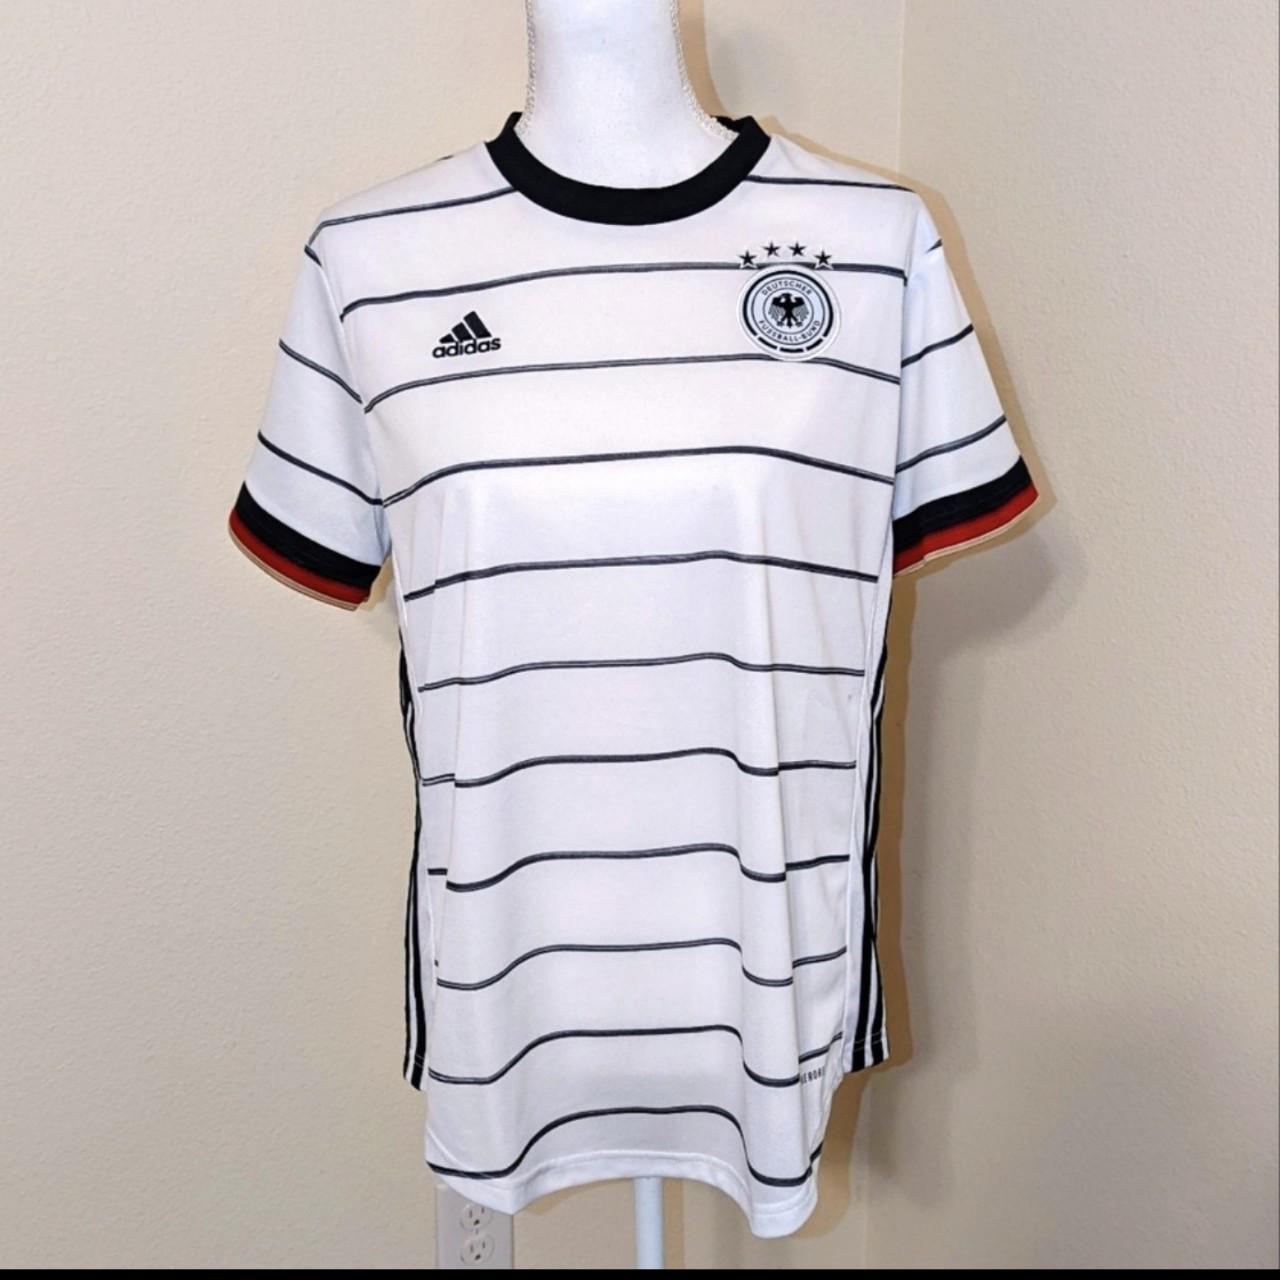 Product Image 1 - Adidas Germany national soccer team